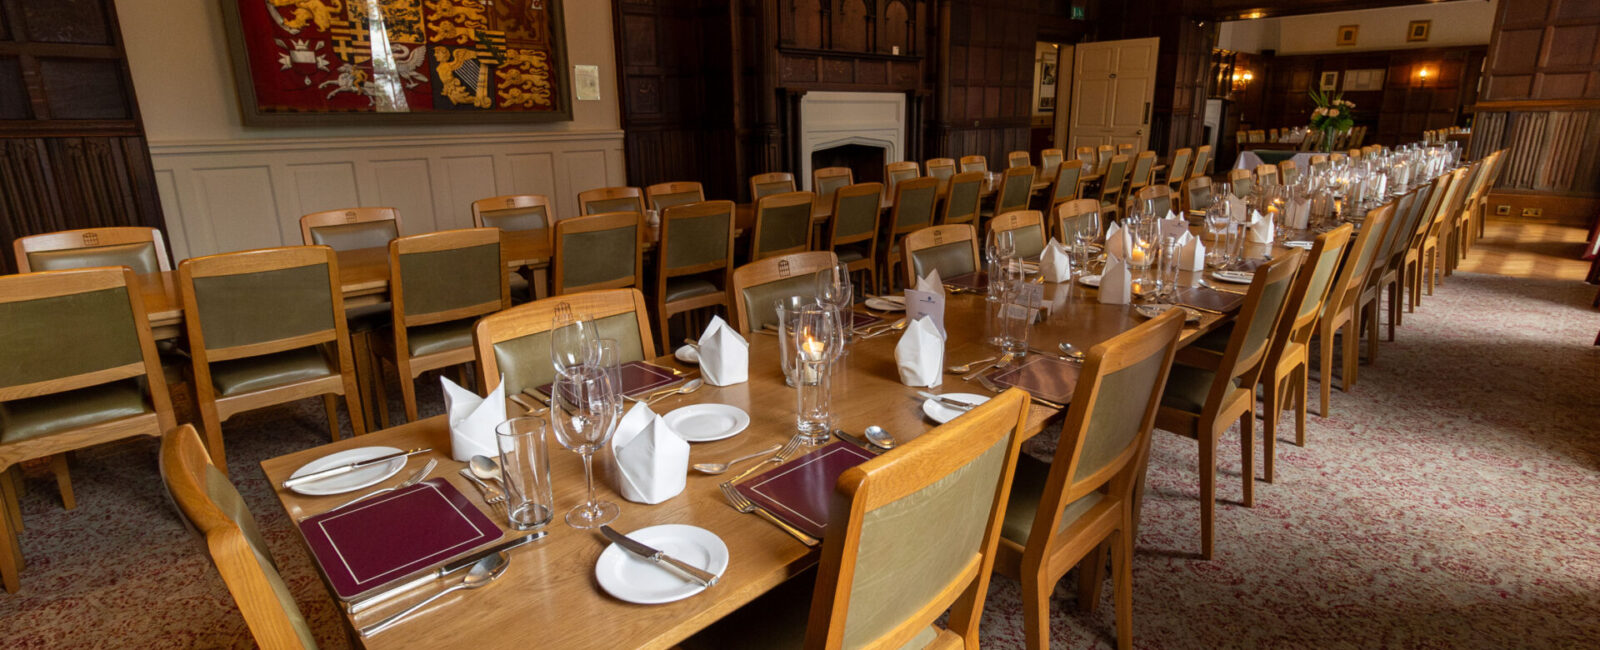 The Cumberland Dining Room, set up for service.